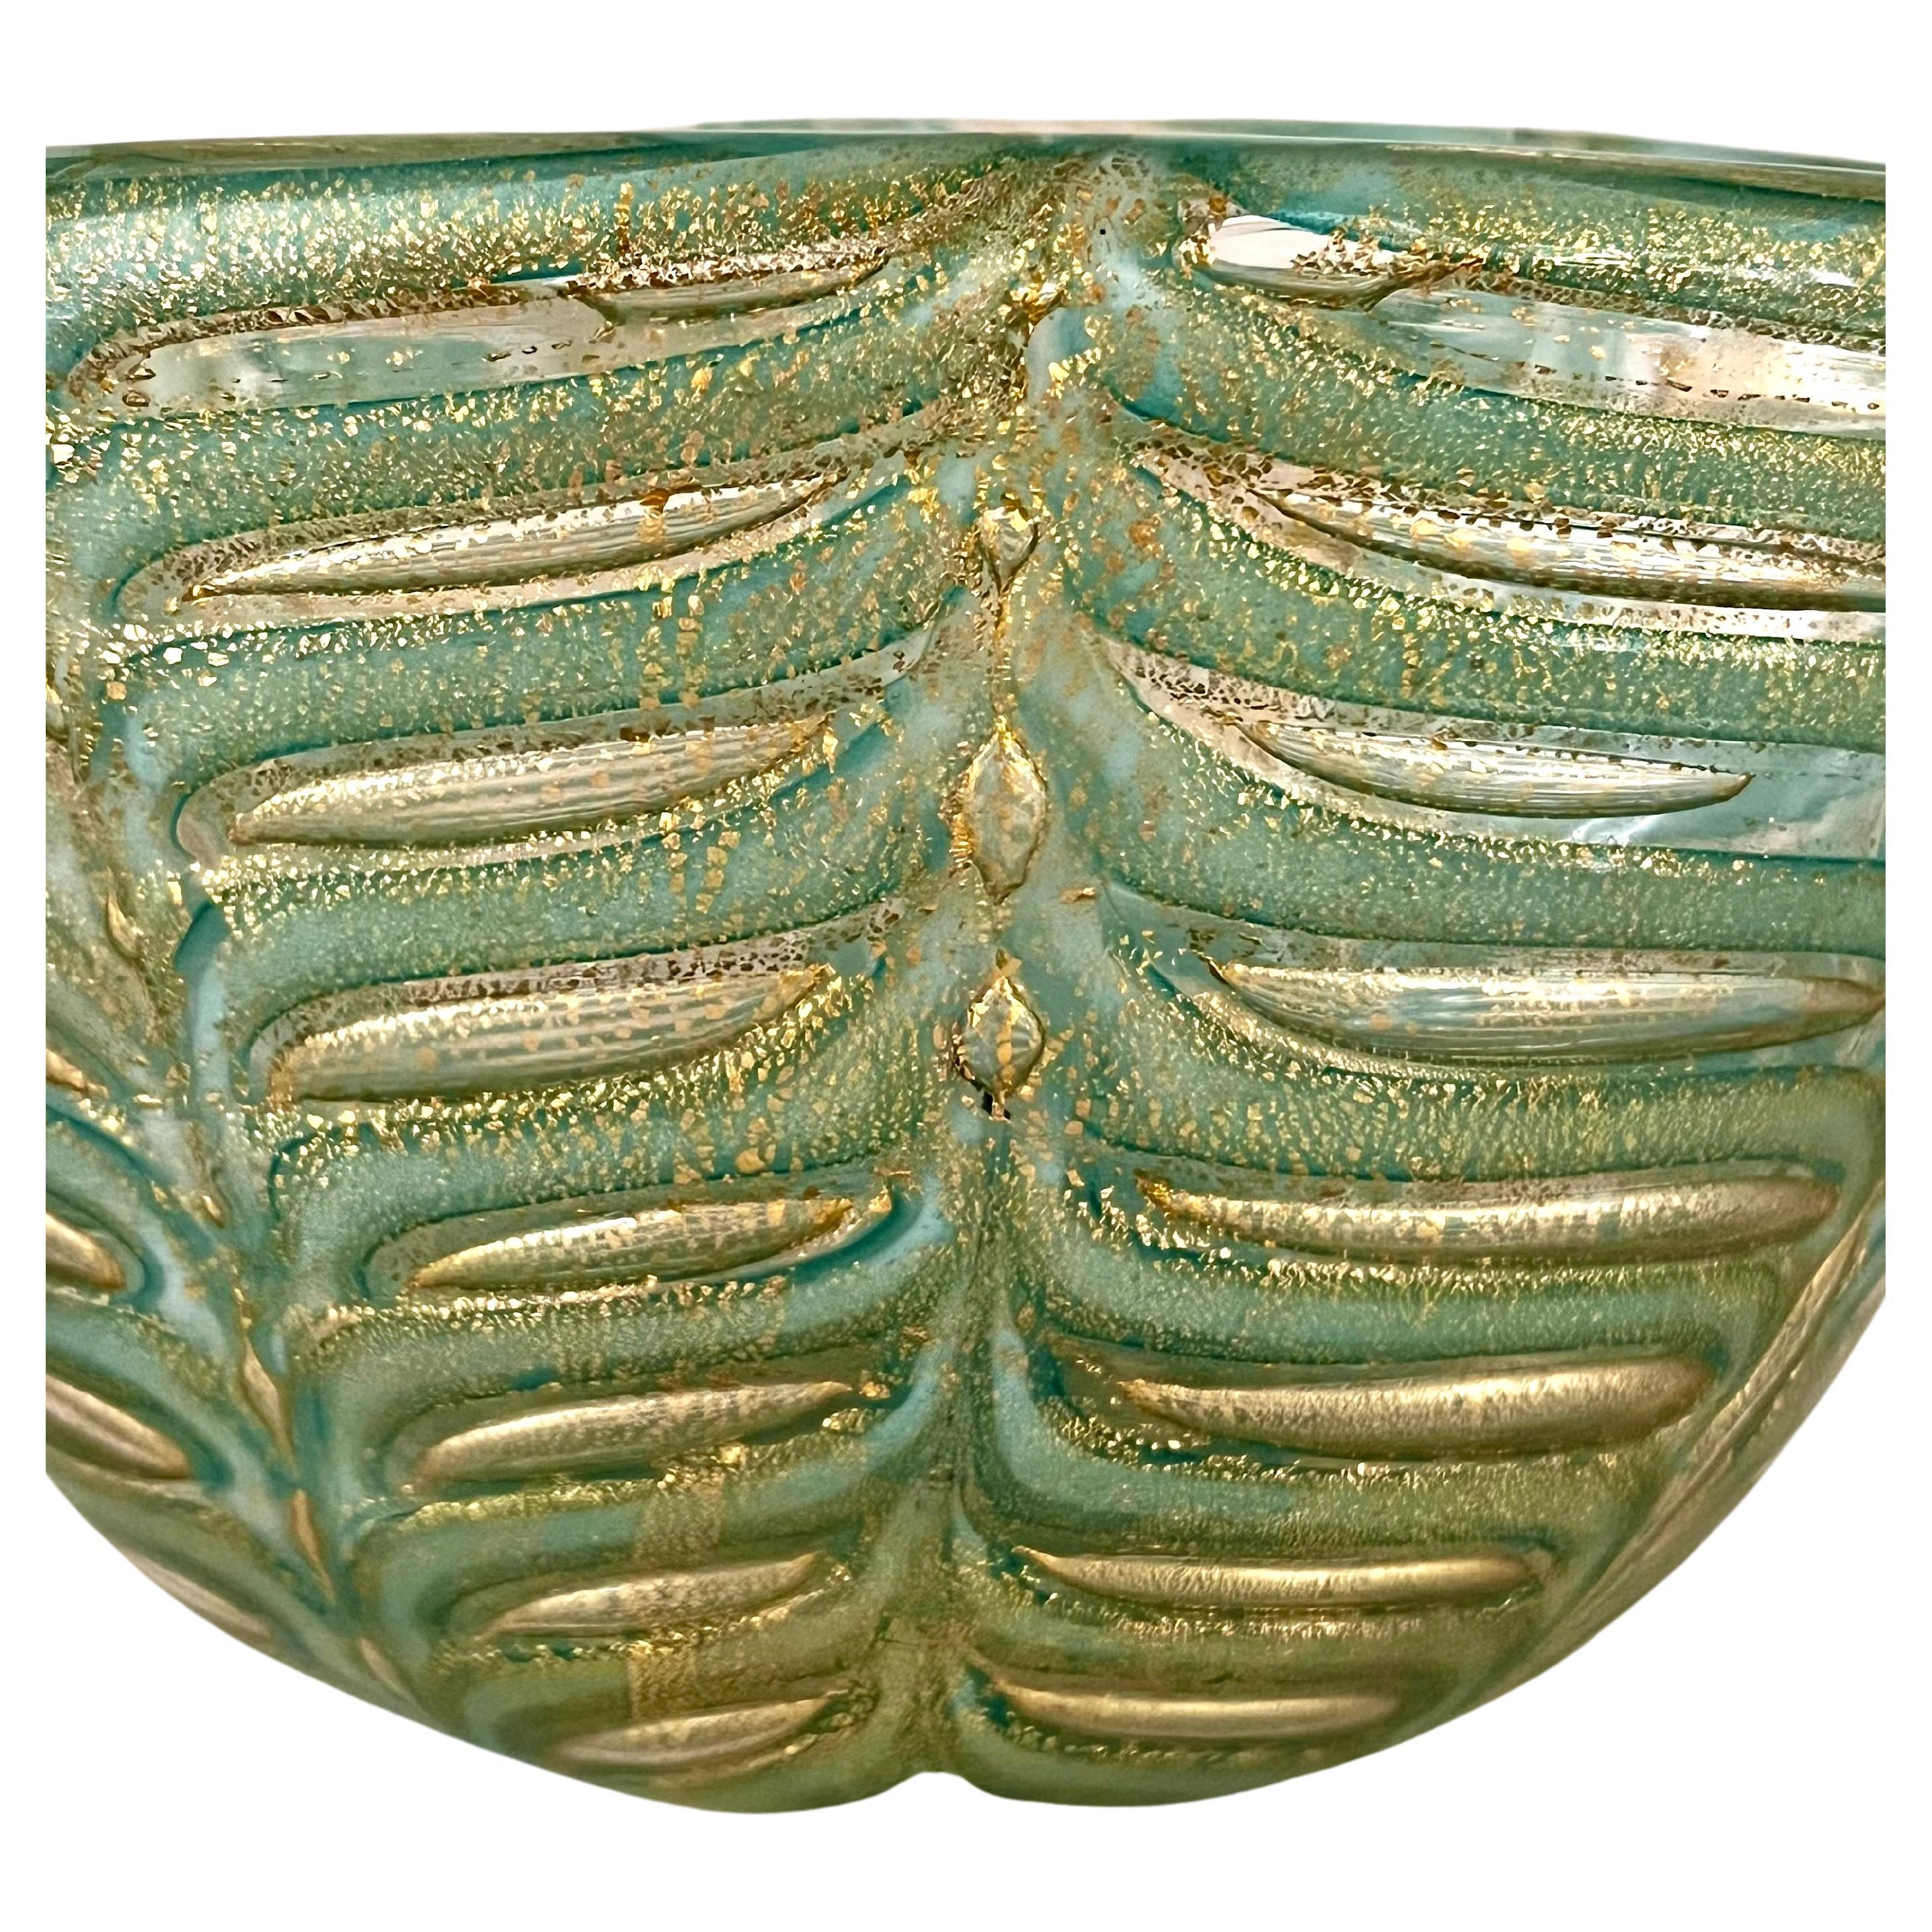 Stunning Green and Gold Leaf Murano Glass Bowl or Vase by Ercole Barovier.  With pure gold leaf this hand blown bowl sculpture is so beautiful in the Graffito technique. 
Perfect for consoles, coffee tables or in the kitchen with fruit or flowers. 